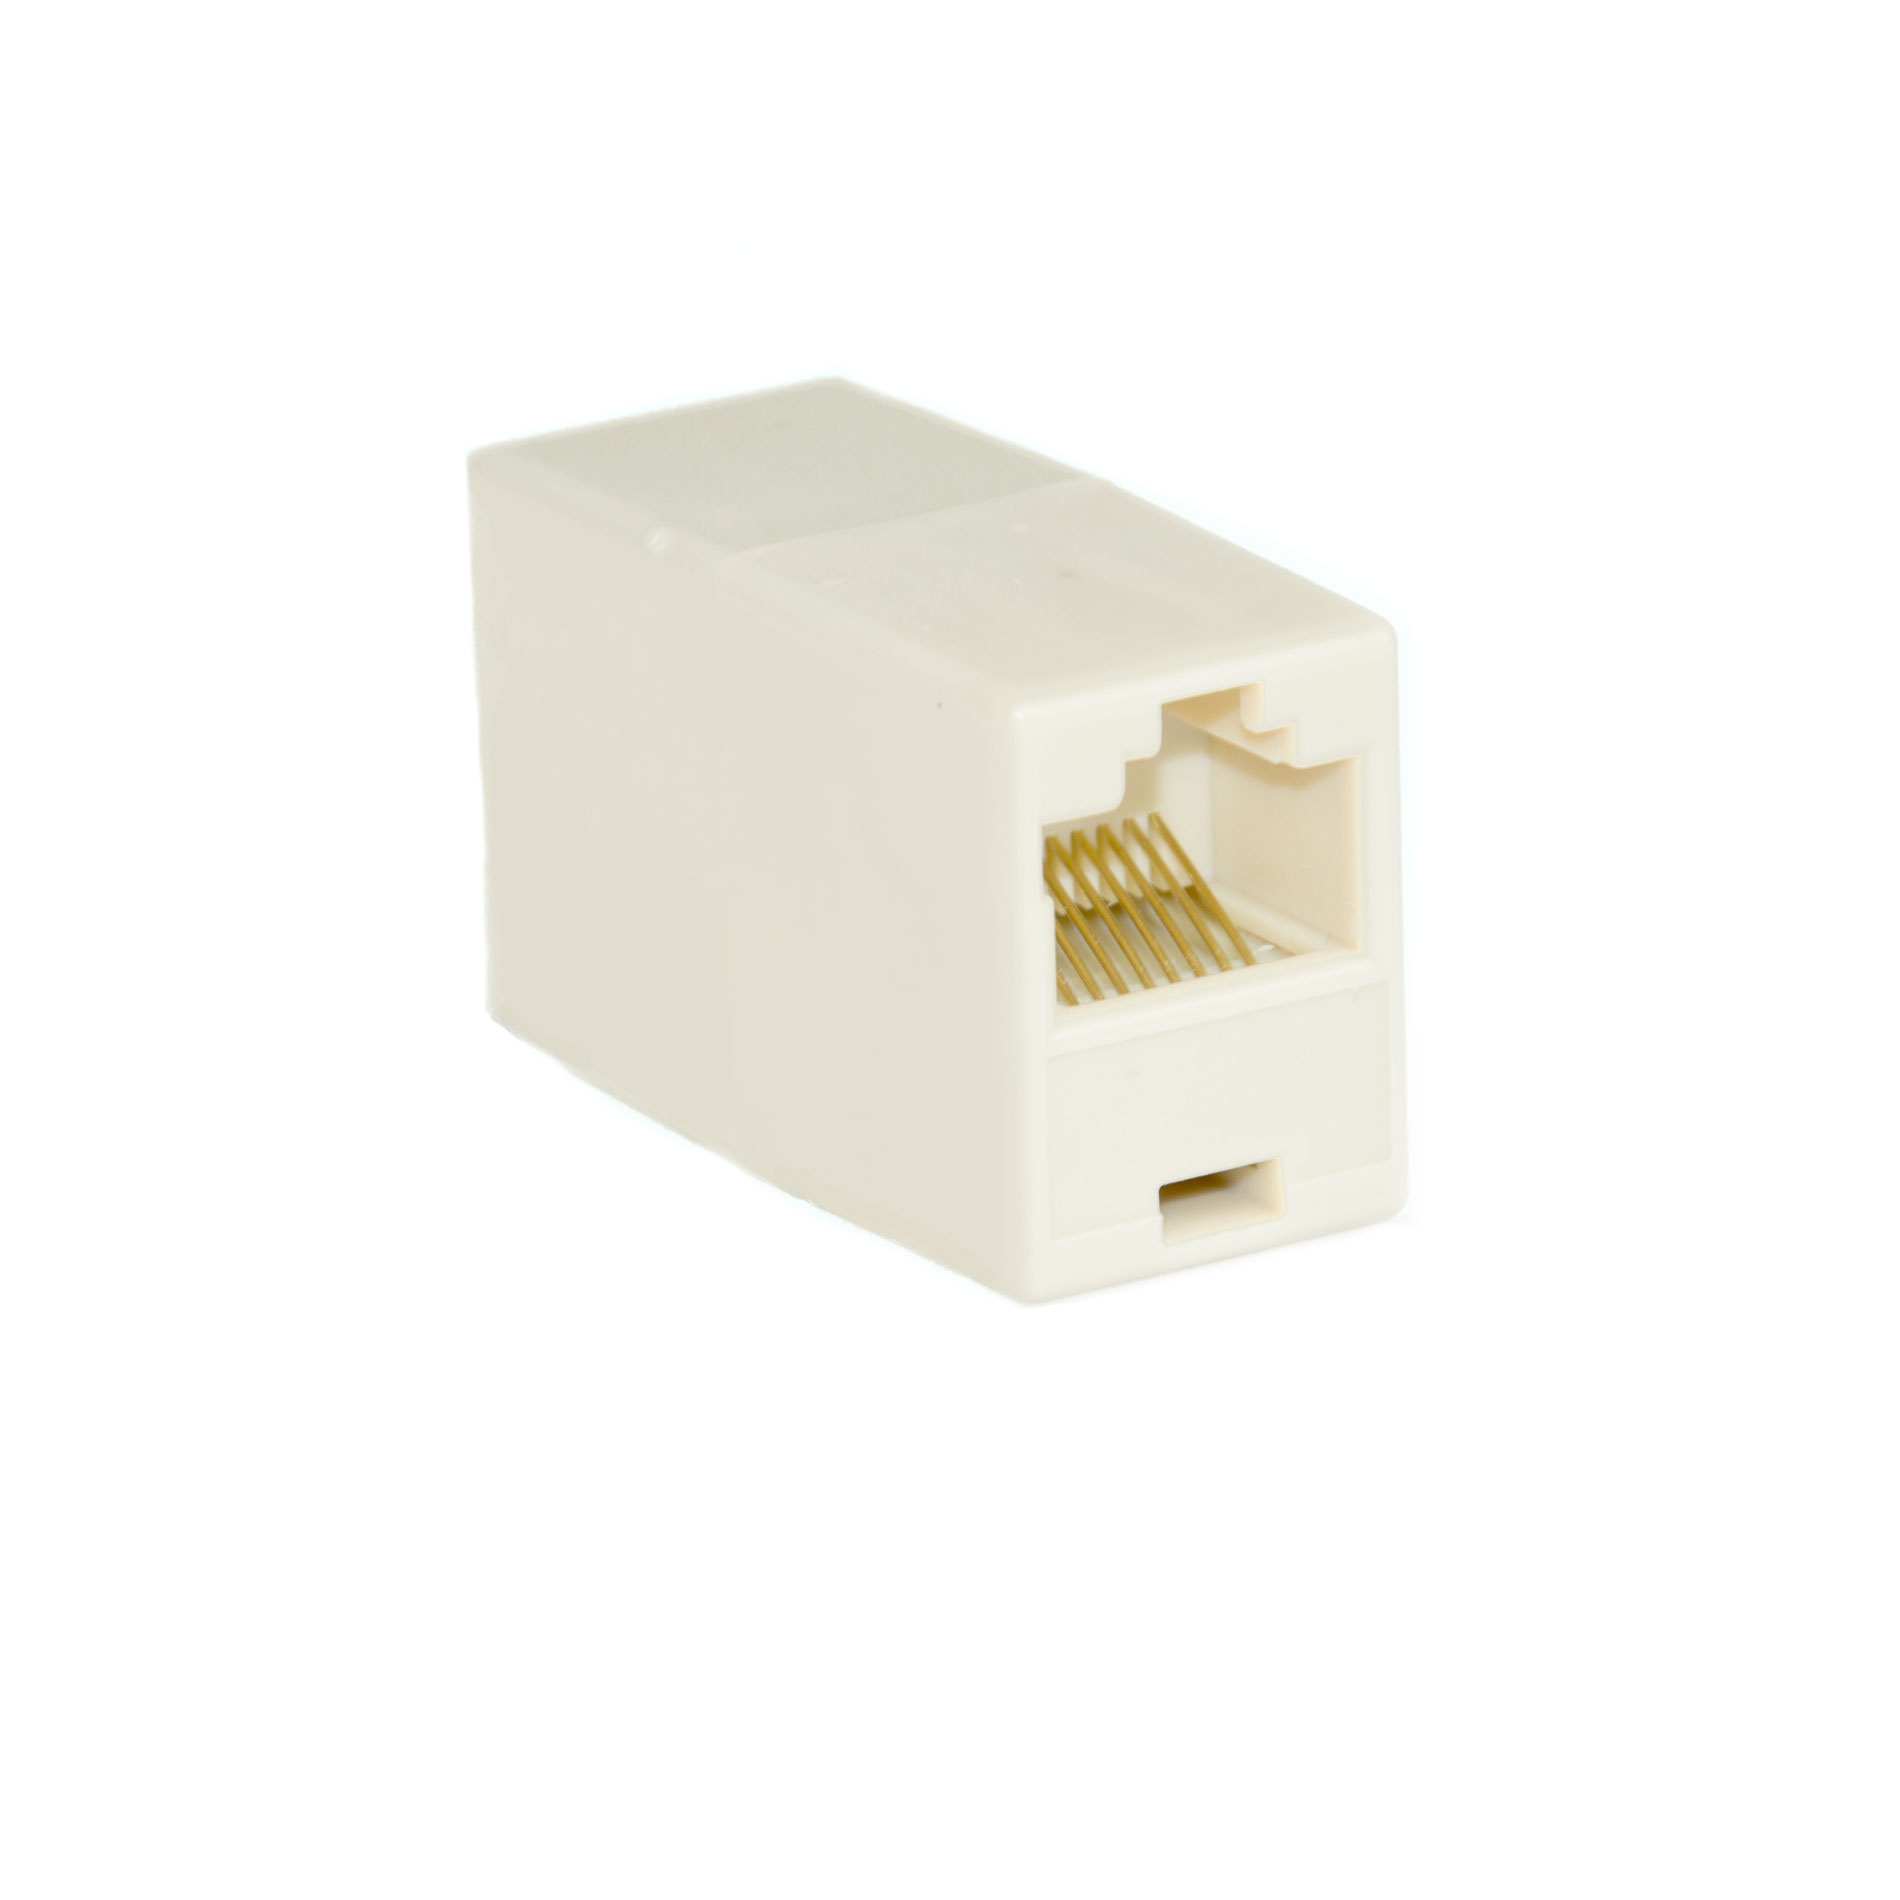 Connector adapter plug RJ45 8P8C gold plated Lisconet